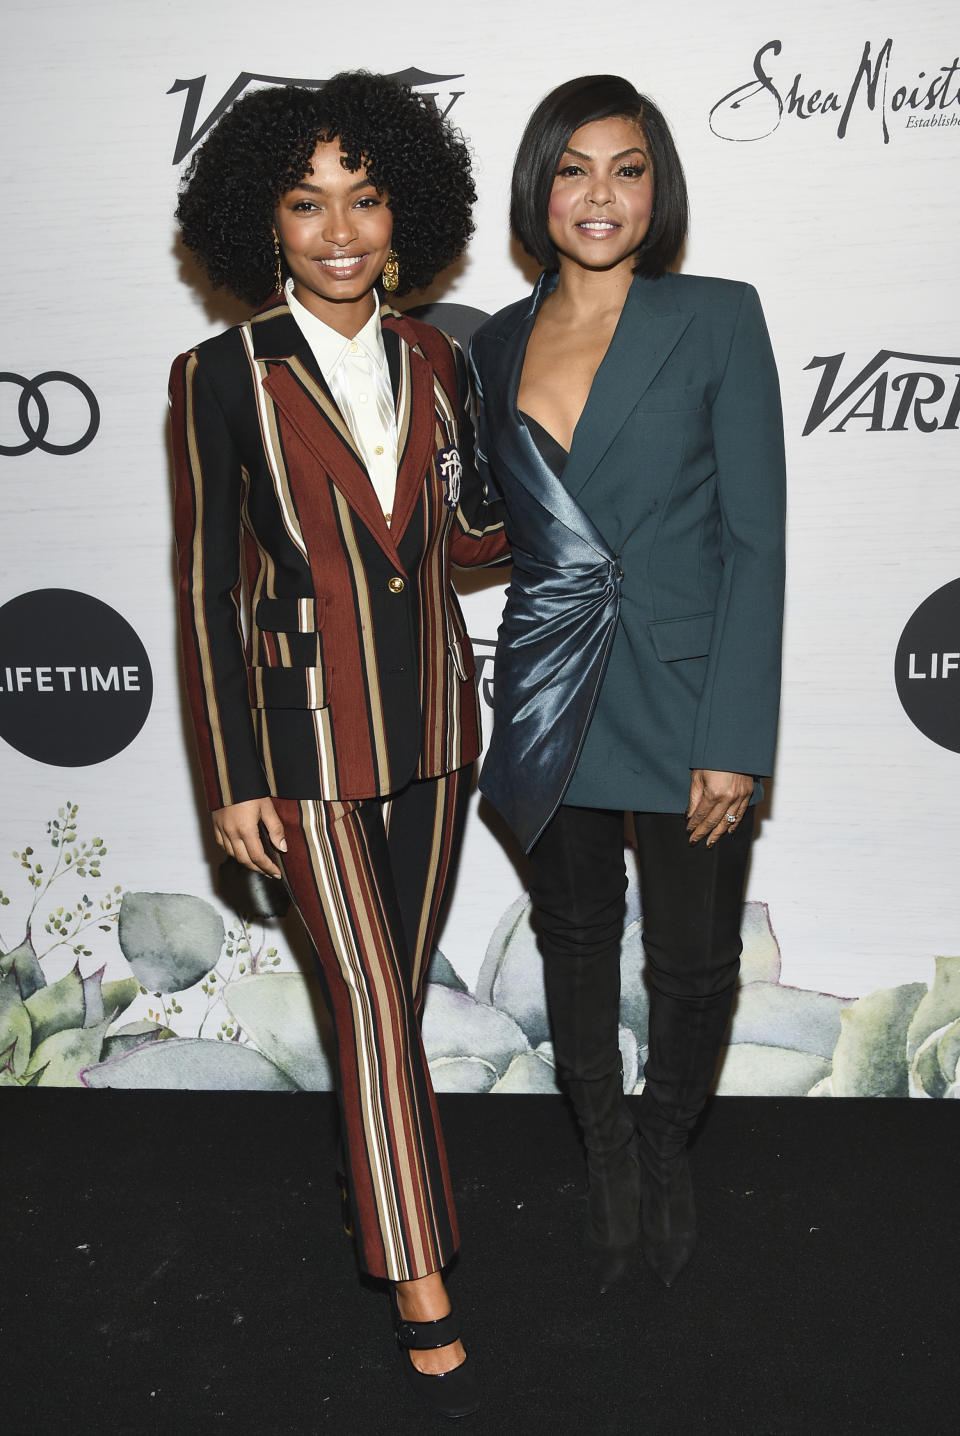 Honoree Taraji P. Henson, right, and actress Yara Shahidi attend Variety's Power of Women: New York presented by Lifetime at Cipriani 42nd Street on Friday, April 5, 2019, in New York. (Photo by Evan Agostini/Invision/AP)